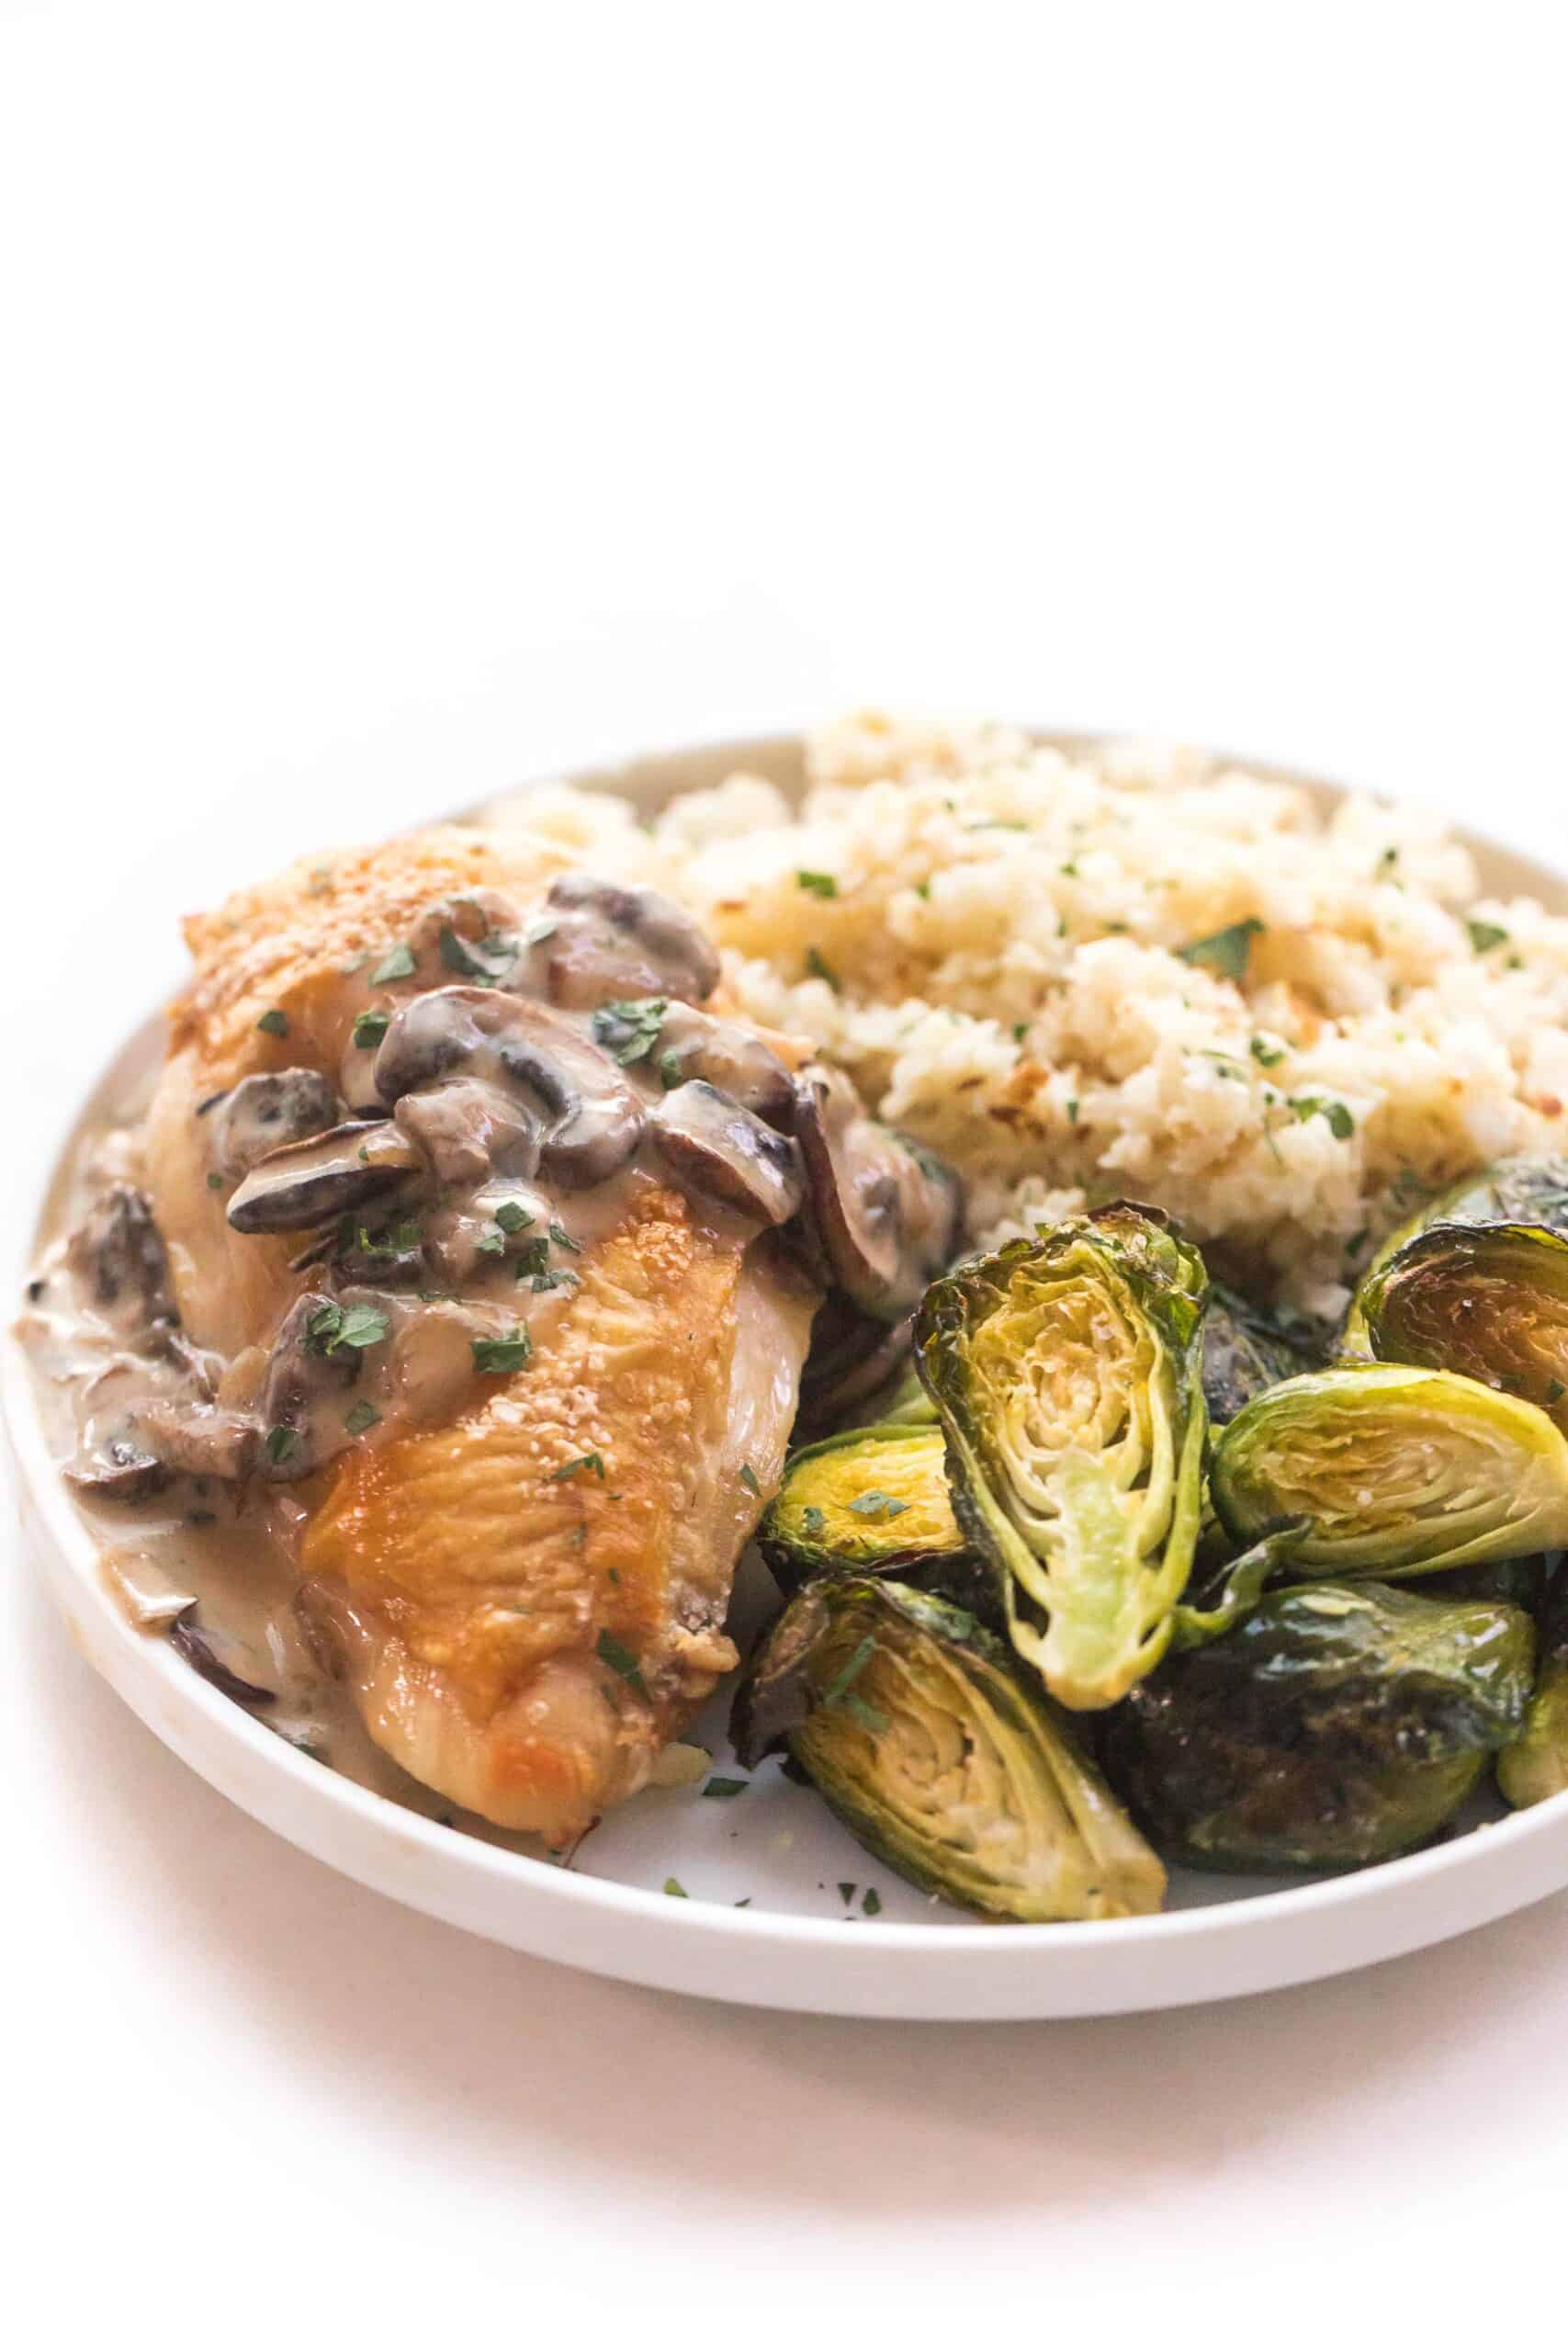 chicken with mushroom gravy on a white plate and background with roasted brussels sprouts and cauliflower rice